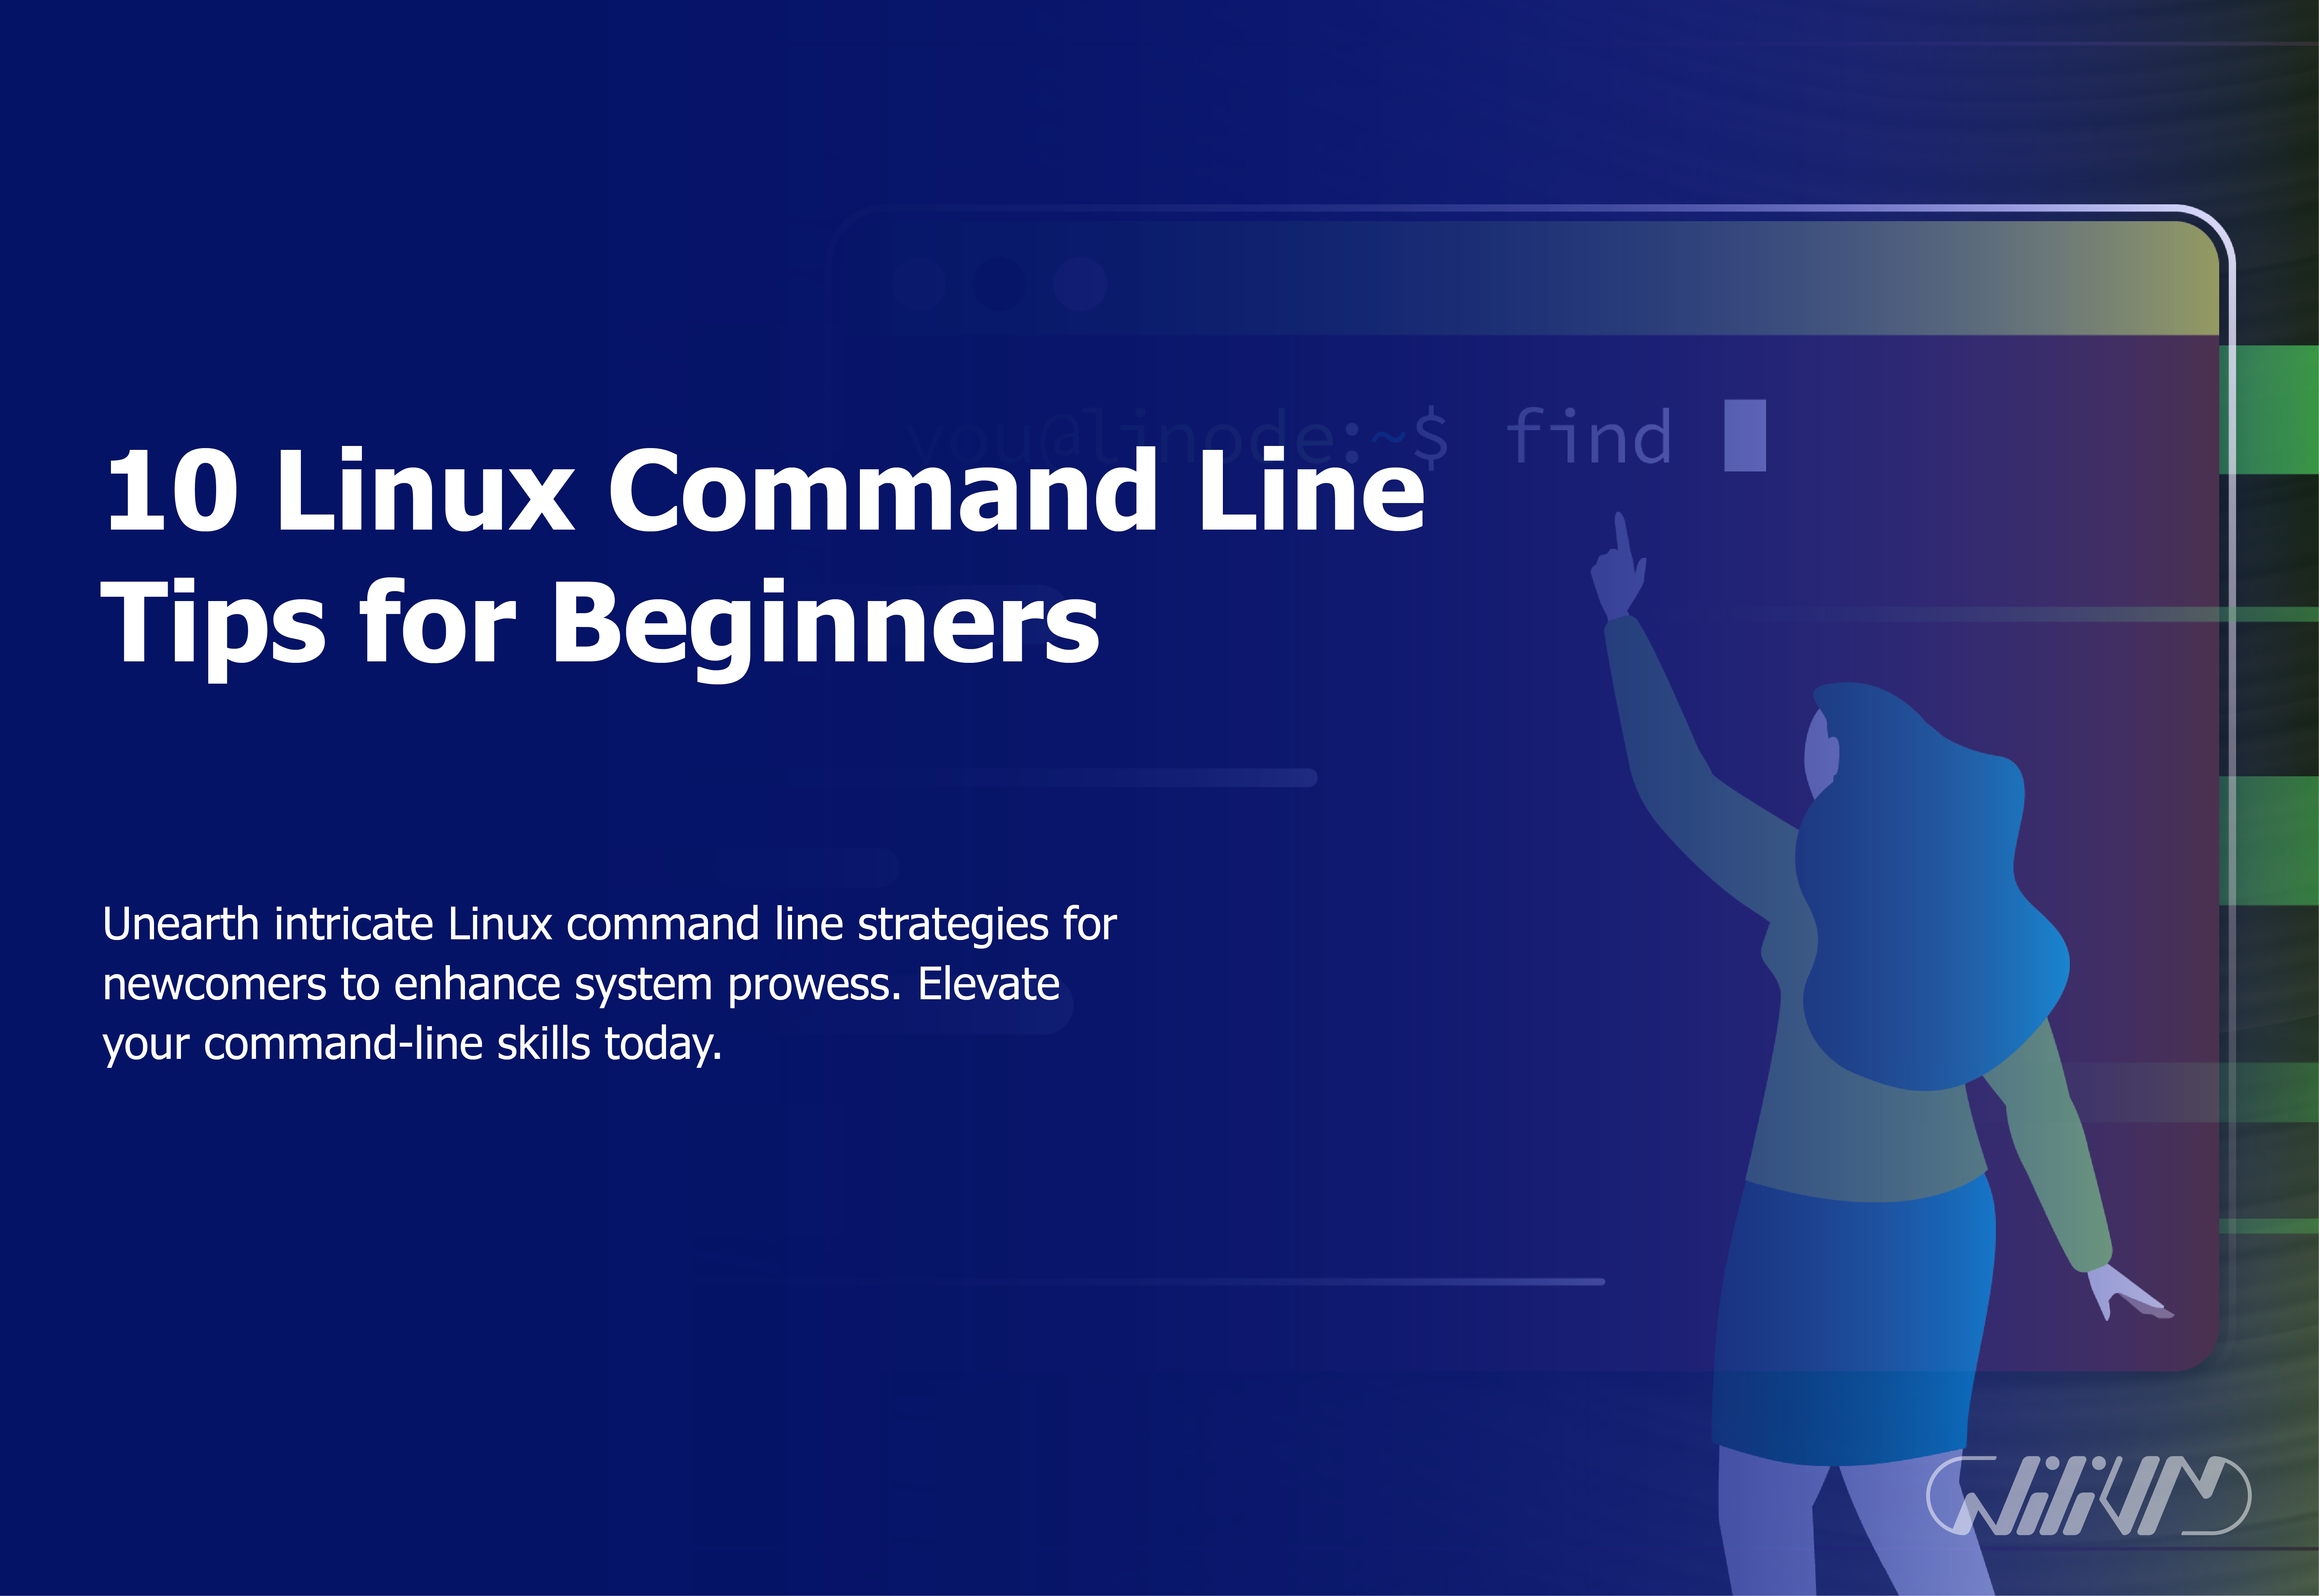 10 Linux Command Line Tips for Beginners